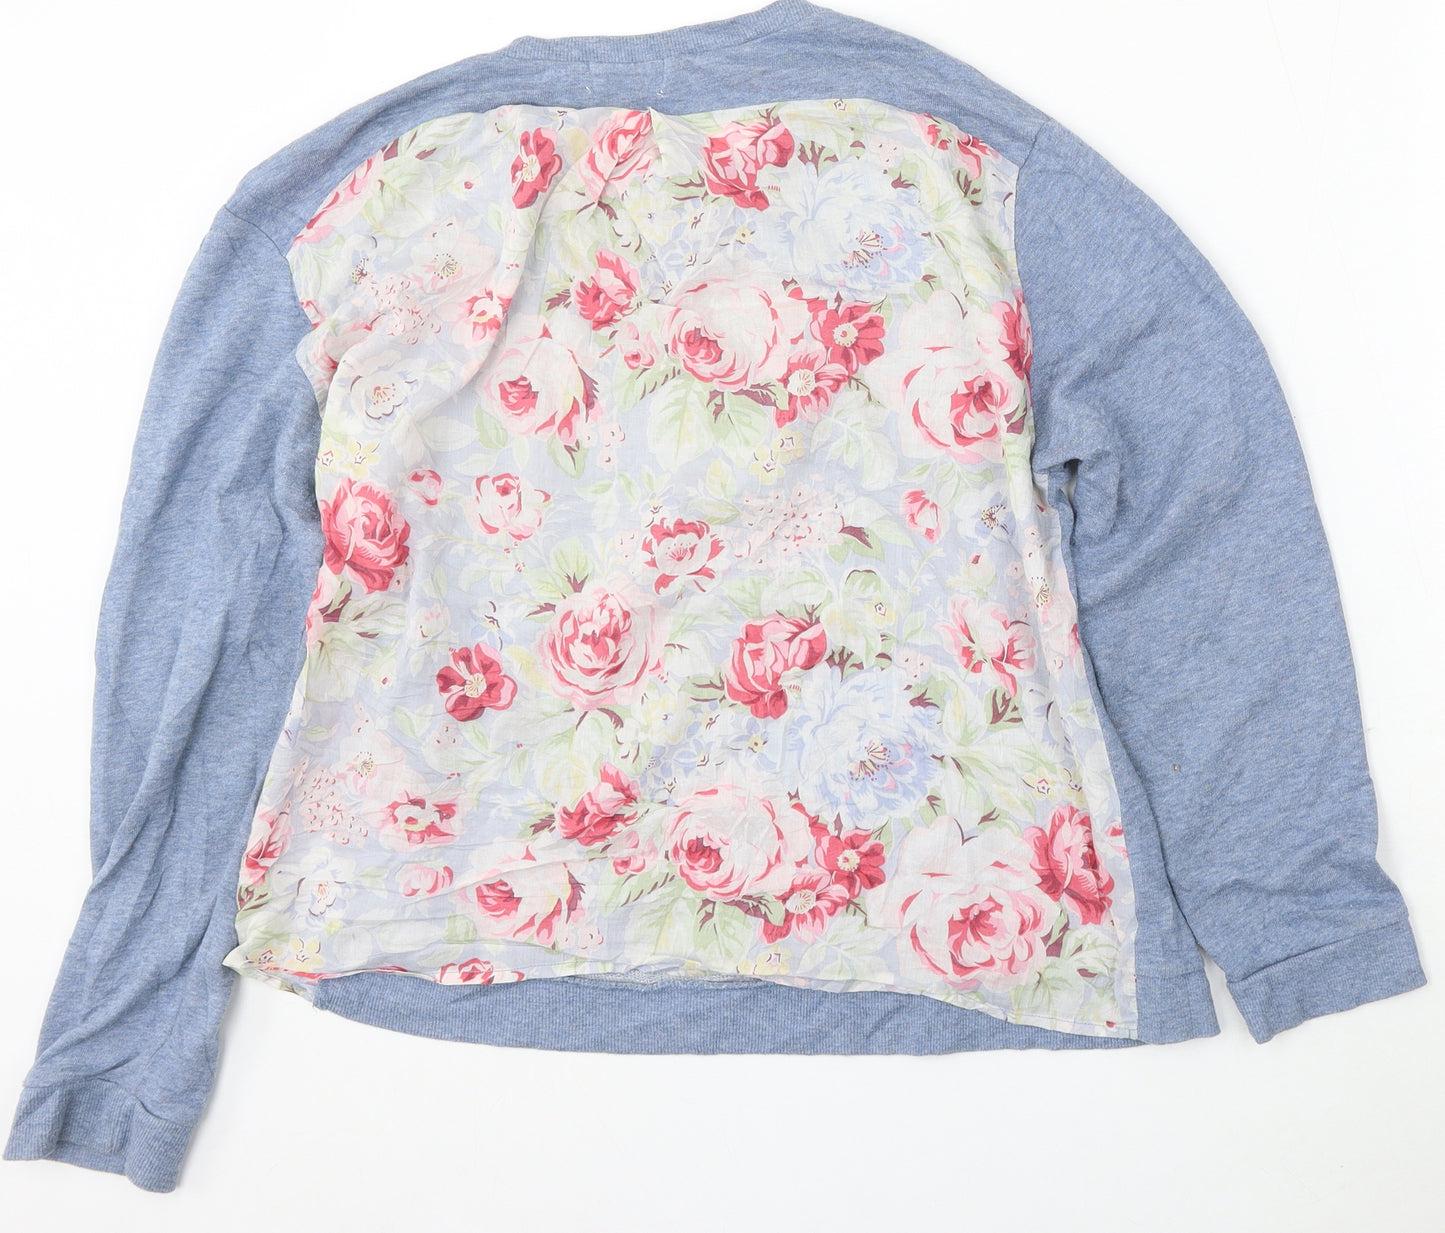 Cath Kidston Womens Blue Round Neck Floral Cotton Pullover Jumper Size S